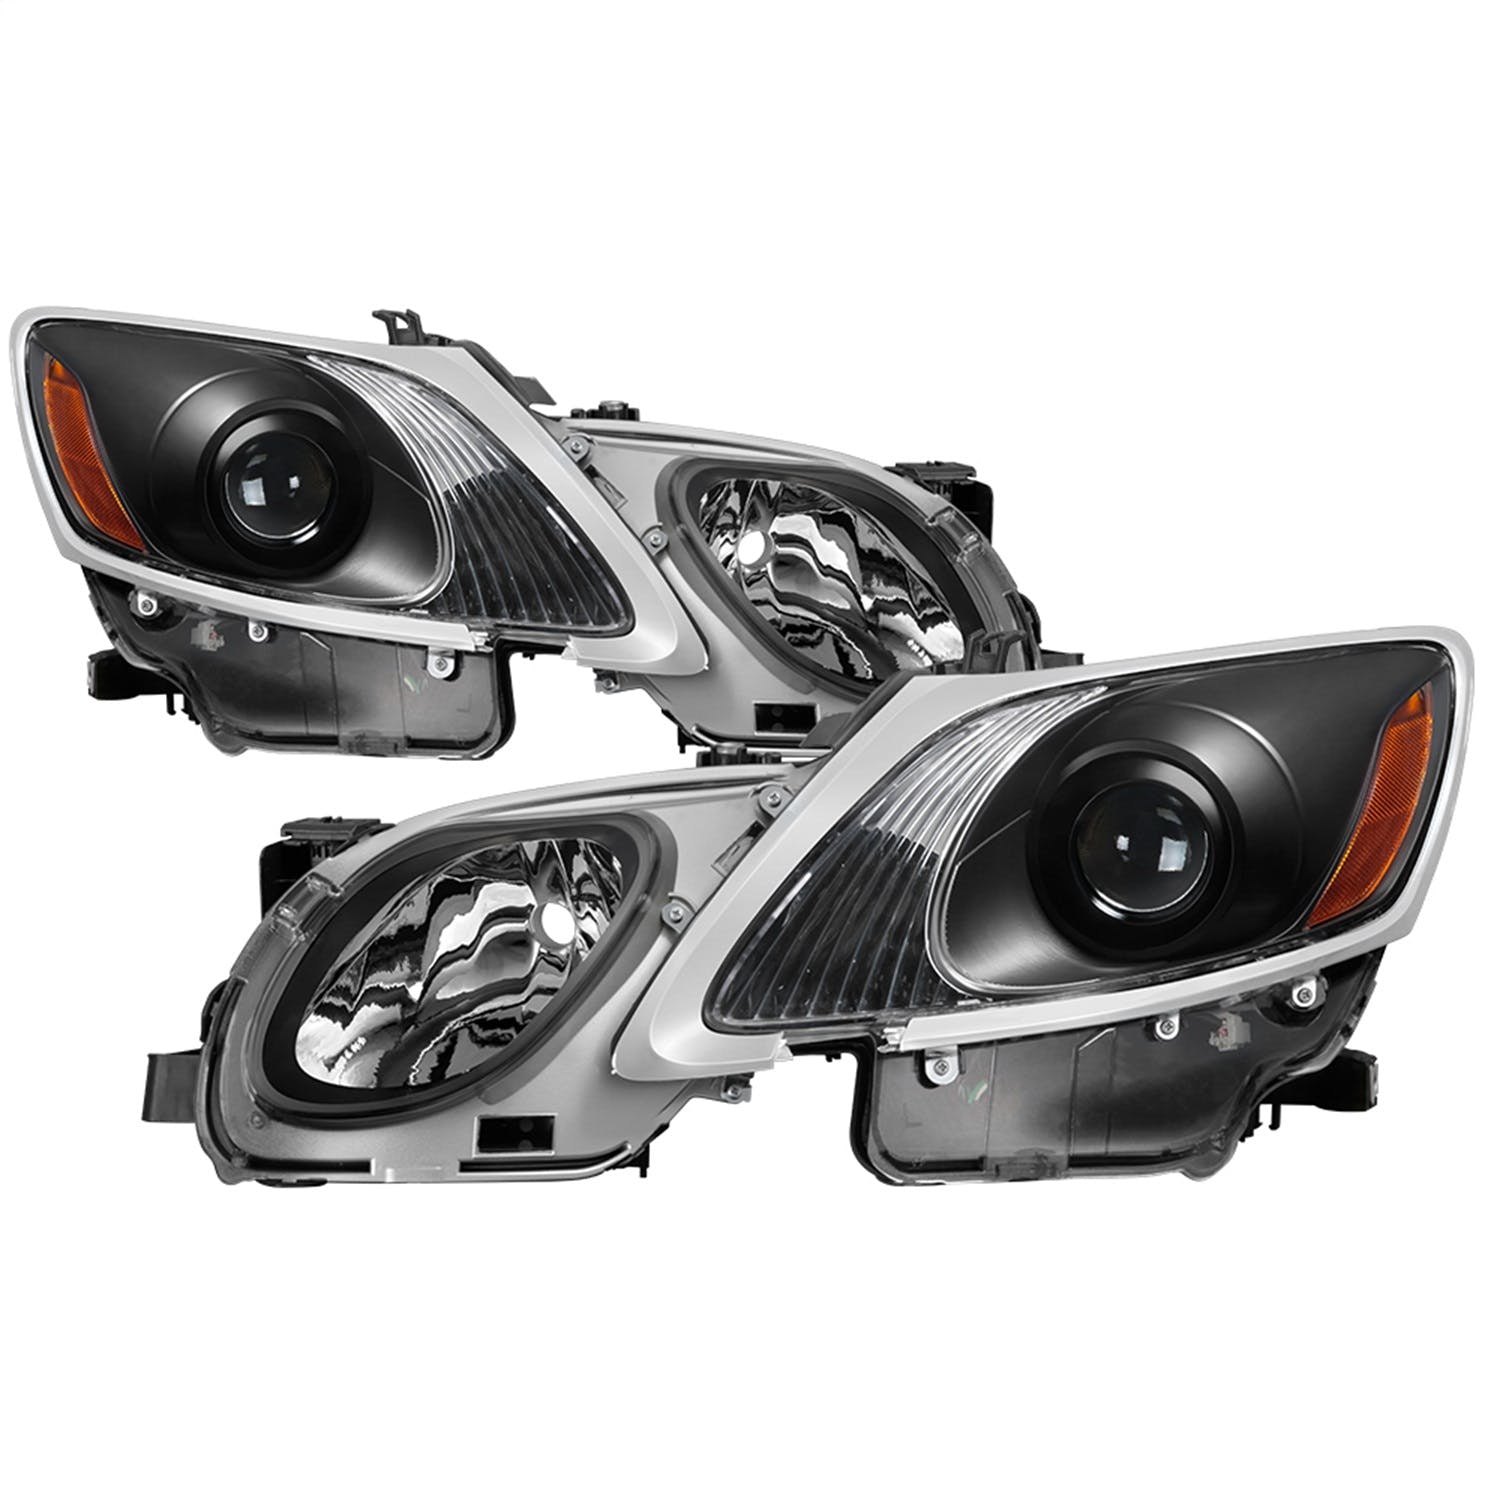 XTUNE POWER 5075888 Lexus GS 06 11 OE Projector Headlights (with AFS. HID Fit and factory headlight washer only) Black